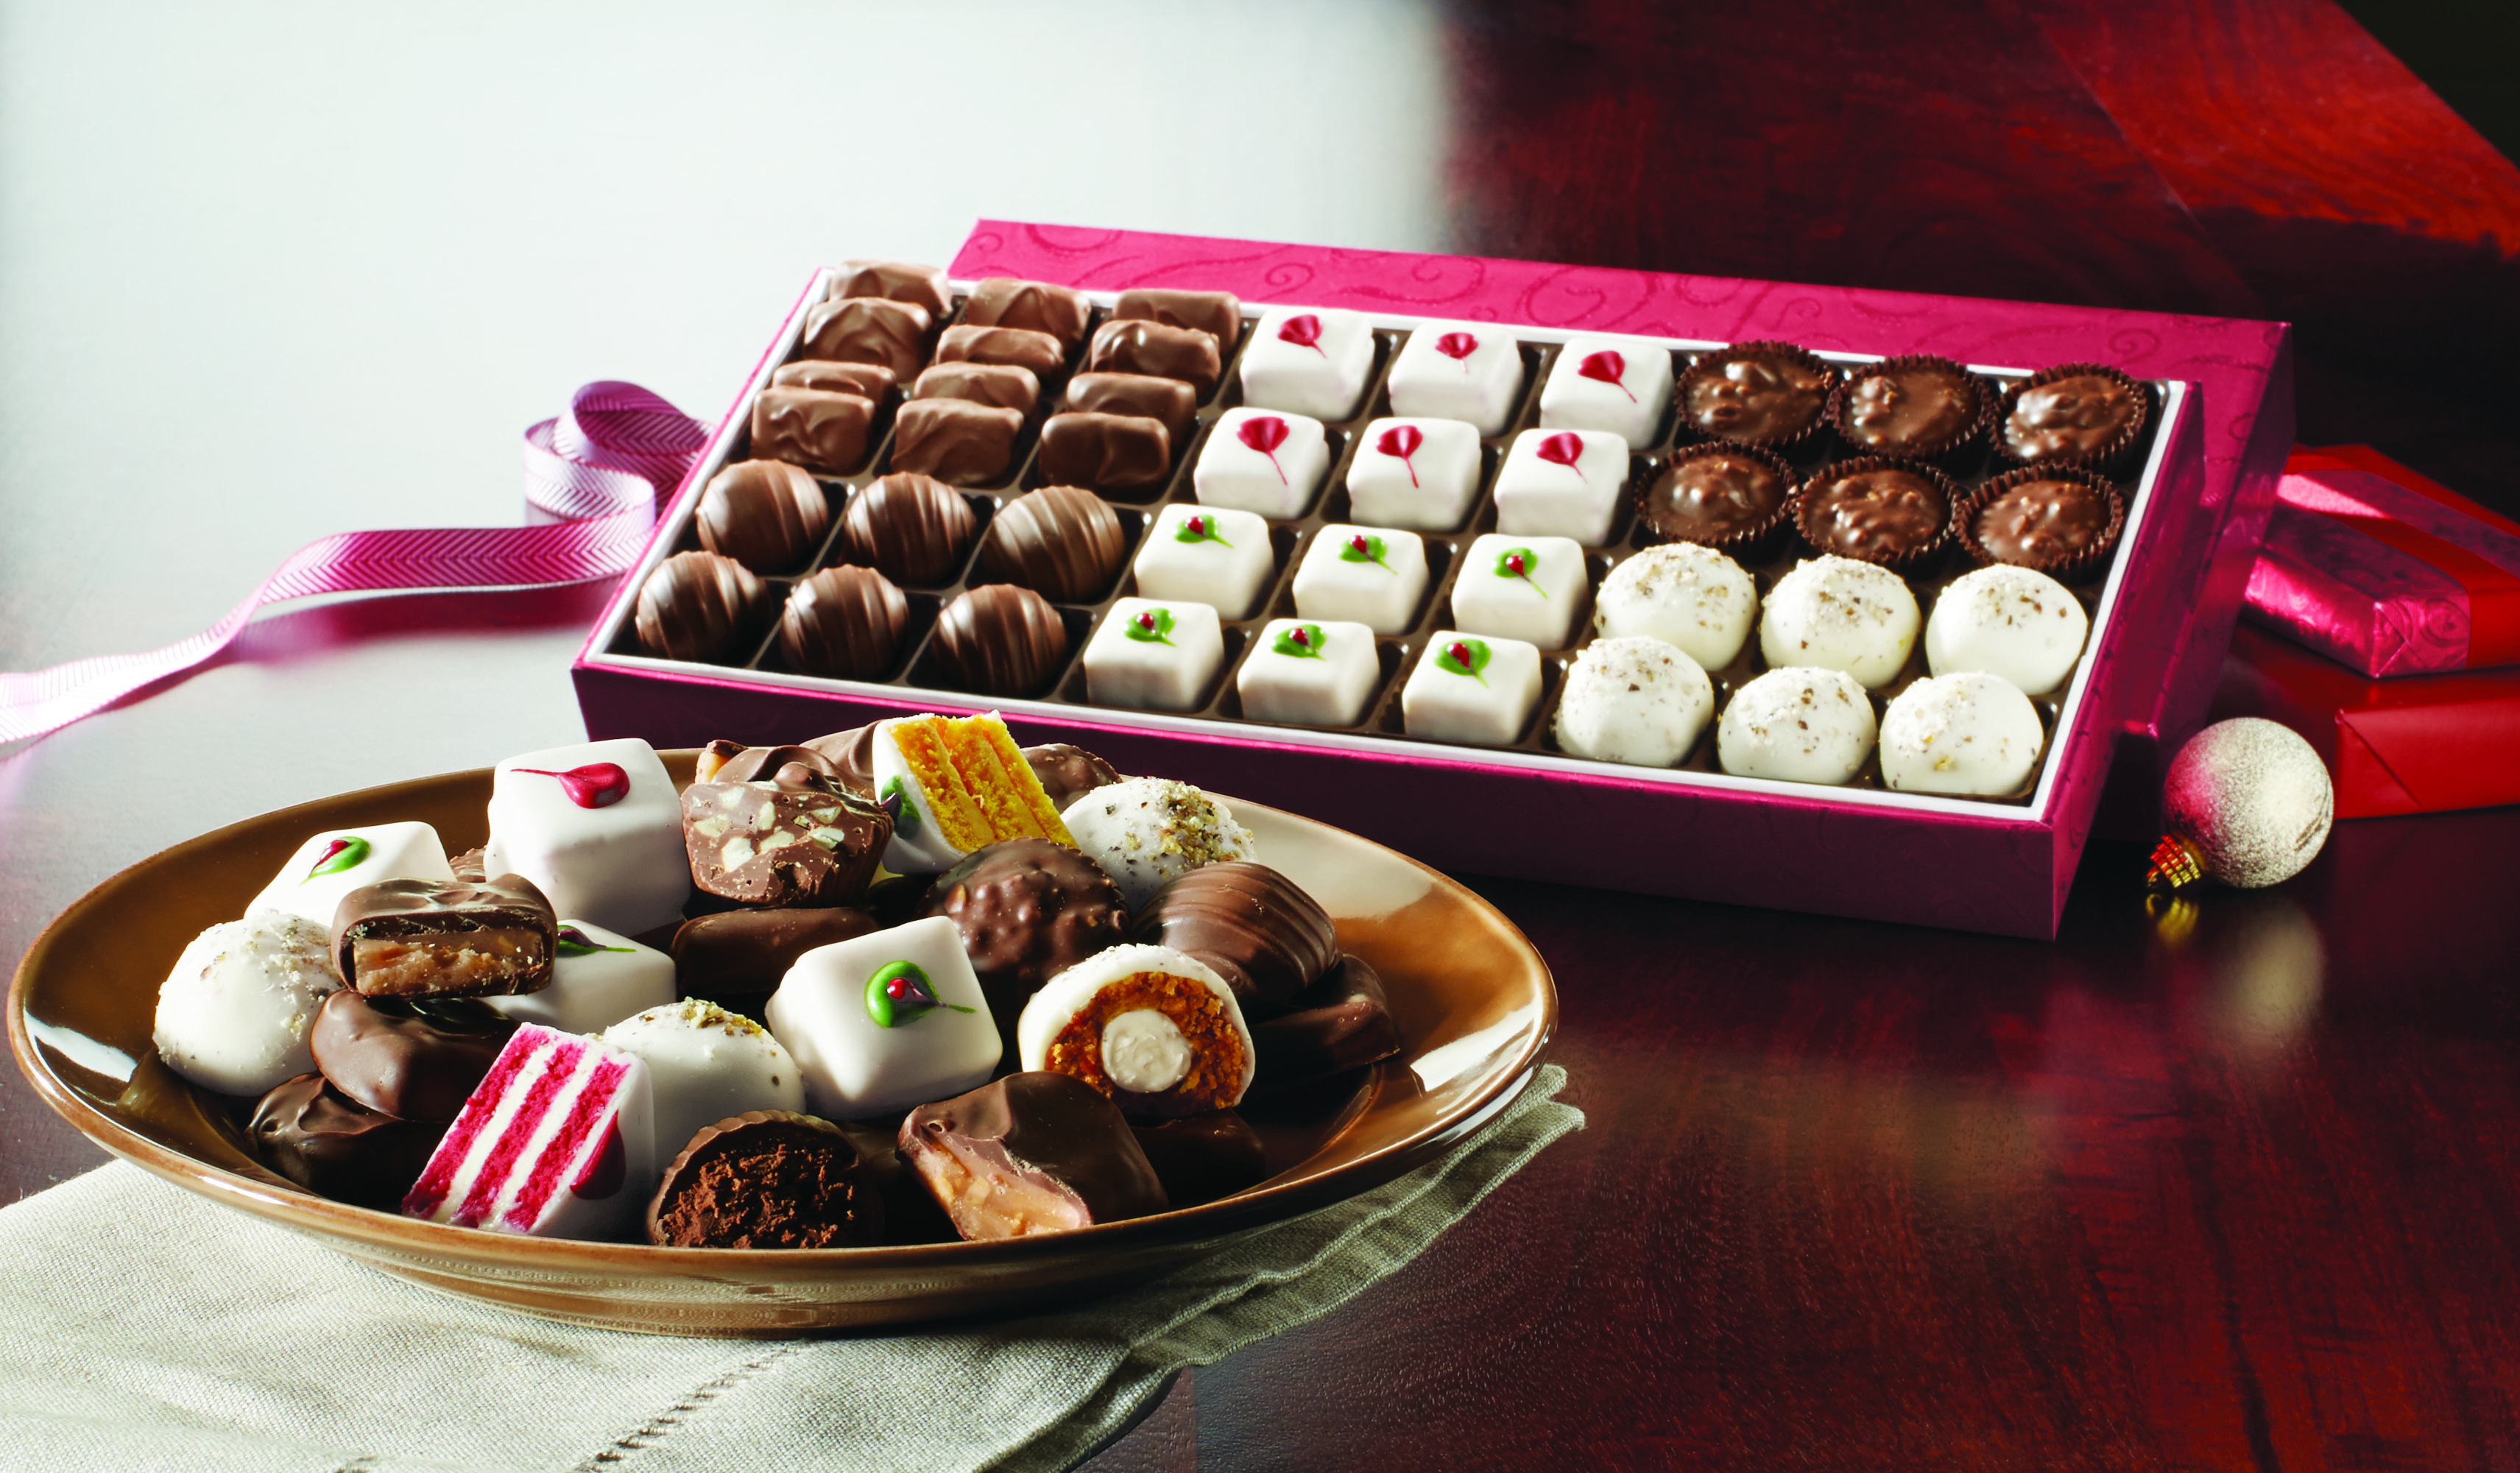 Offer holiday guests a selection of candy and mini desserts